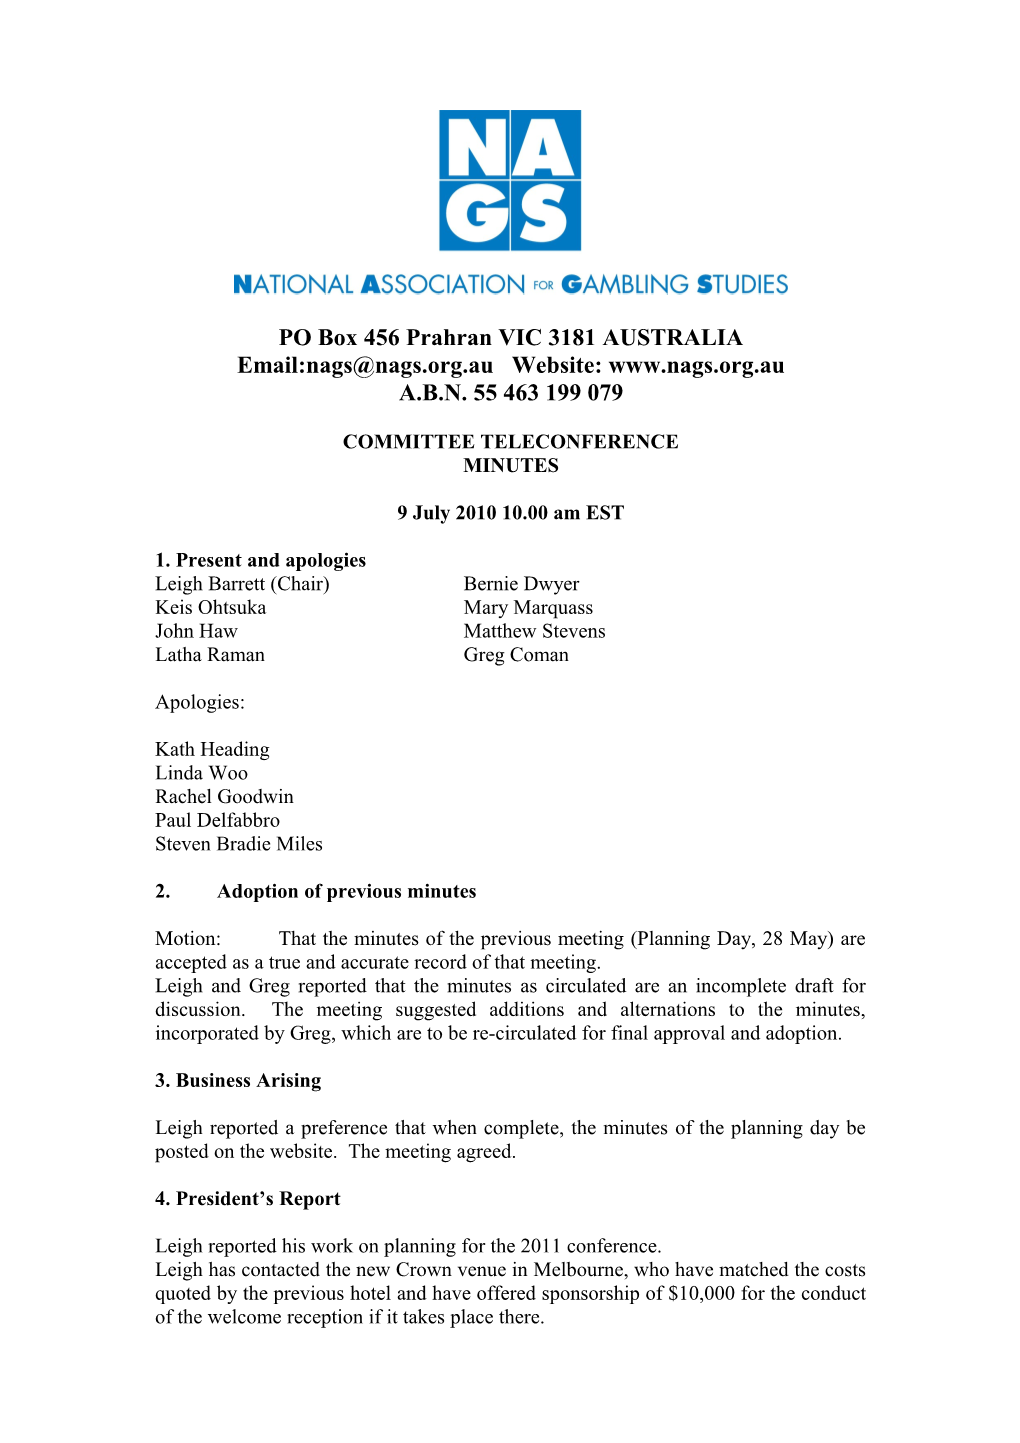 Continuation of Minutes of the NAGS Teleconference 15 March